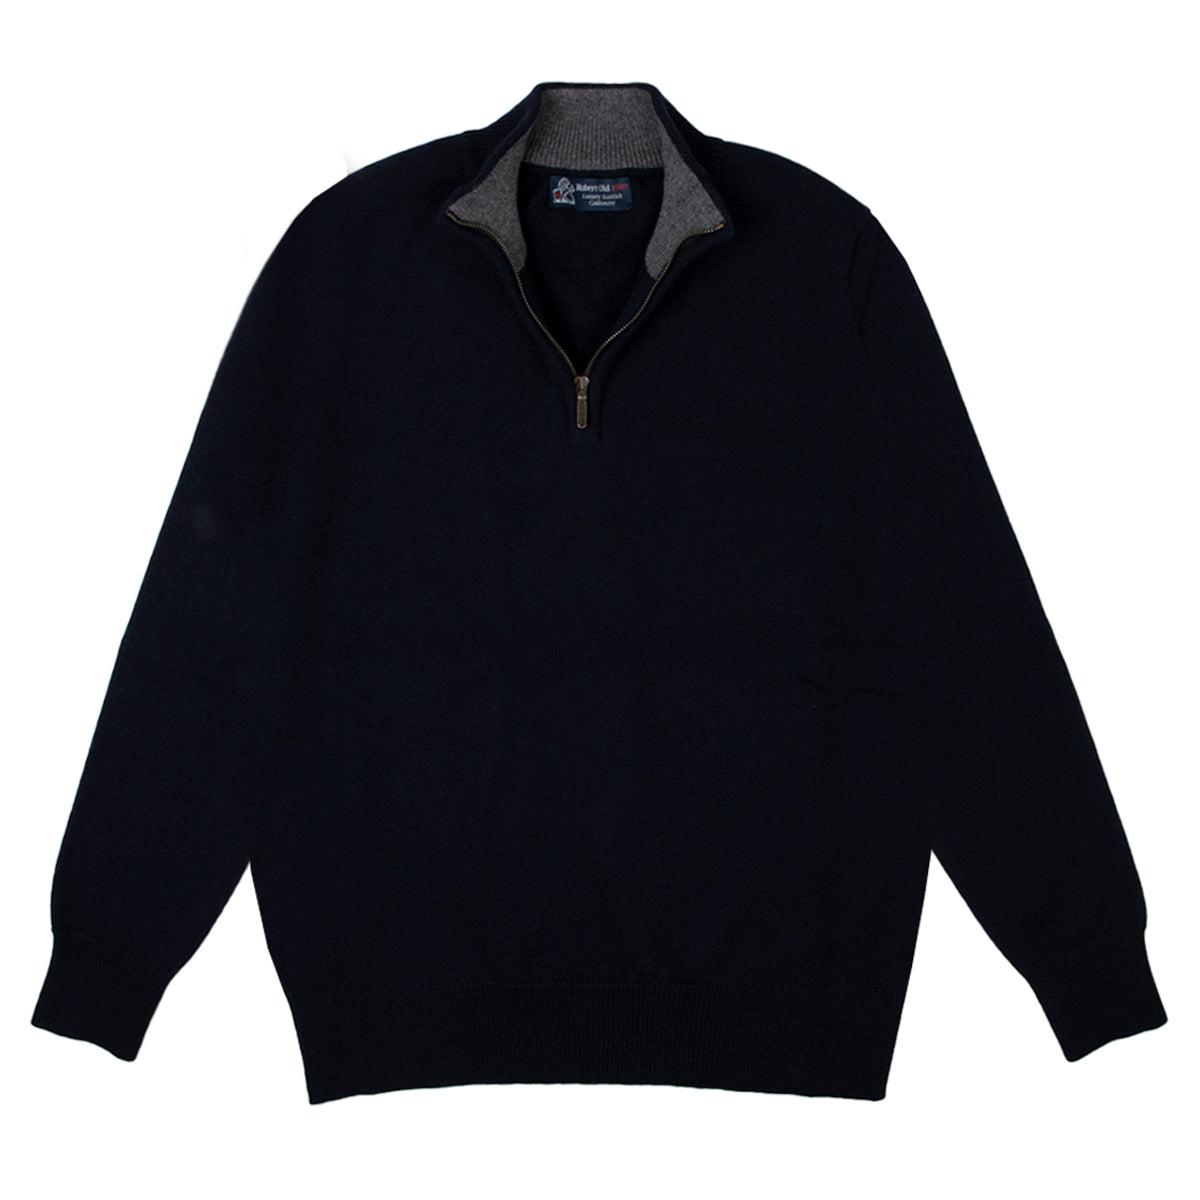 The Bowmore 1/4 Zip Neck Cashmere Sweater - Nero Navy / Derby  Robert Old   